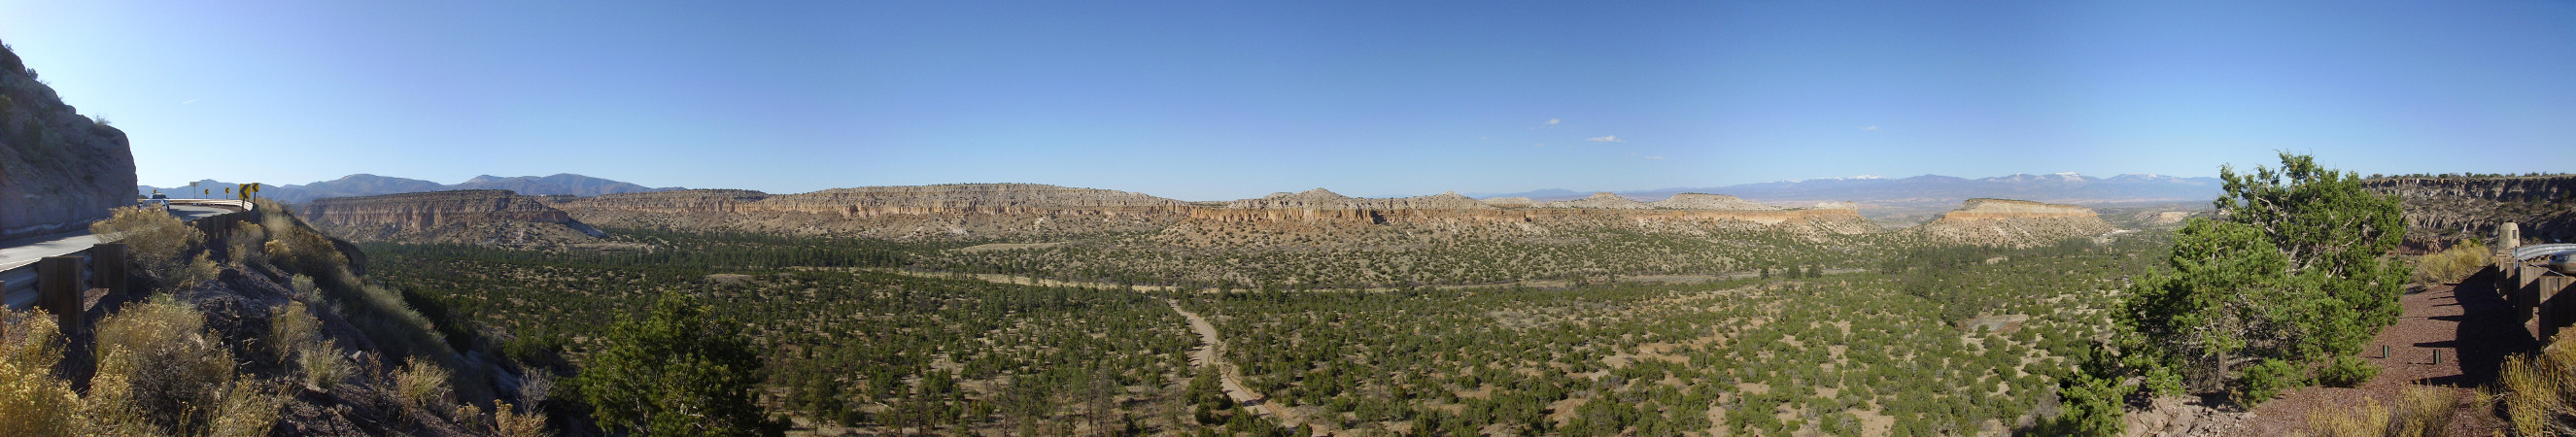 Pueblo Canyon from Clinton P. Anderson Scenic Overlook